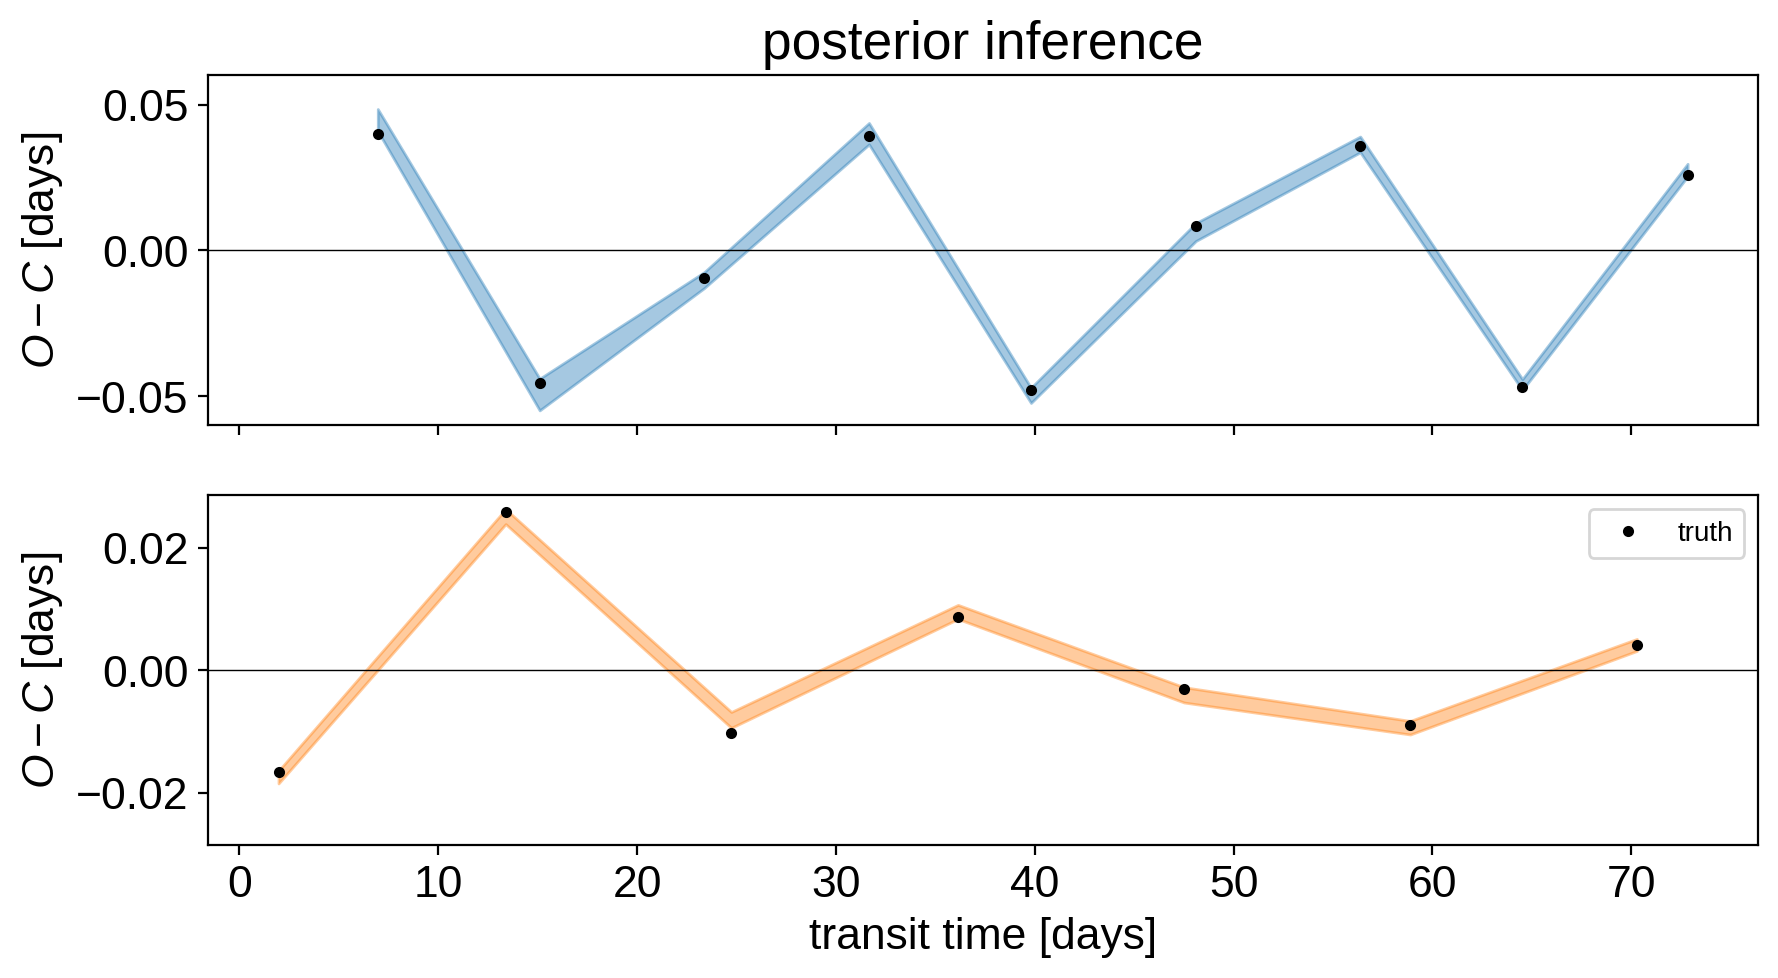 Figure from Fitting transit times